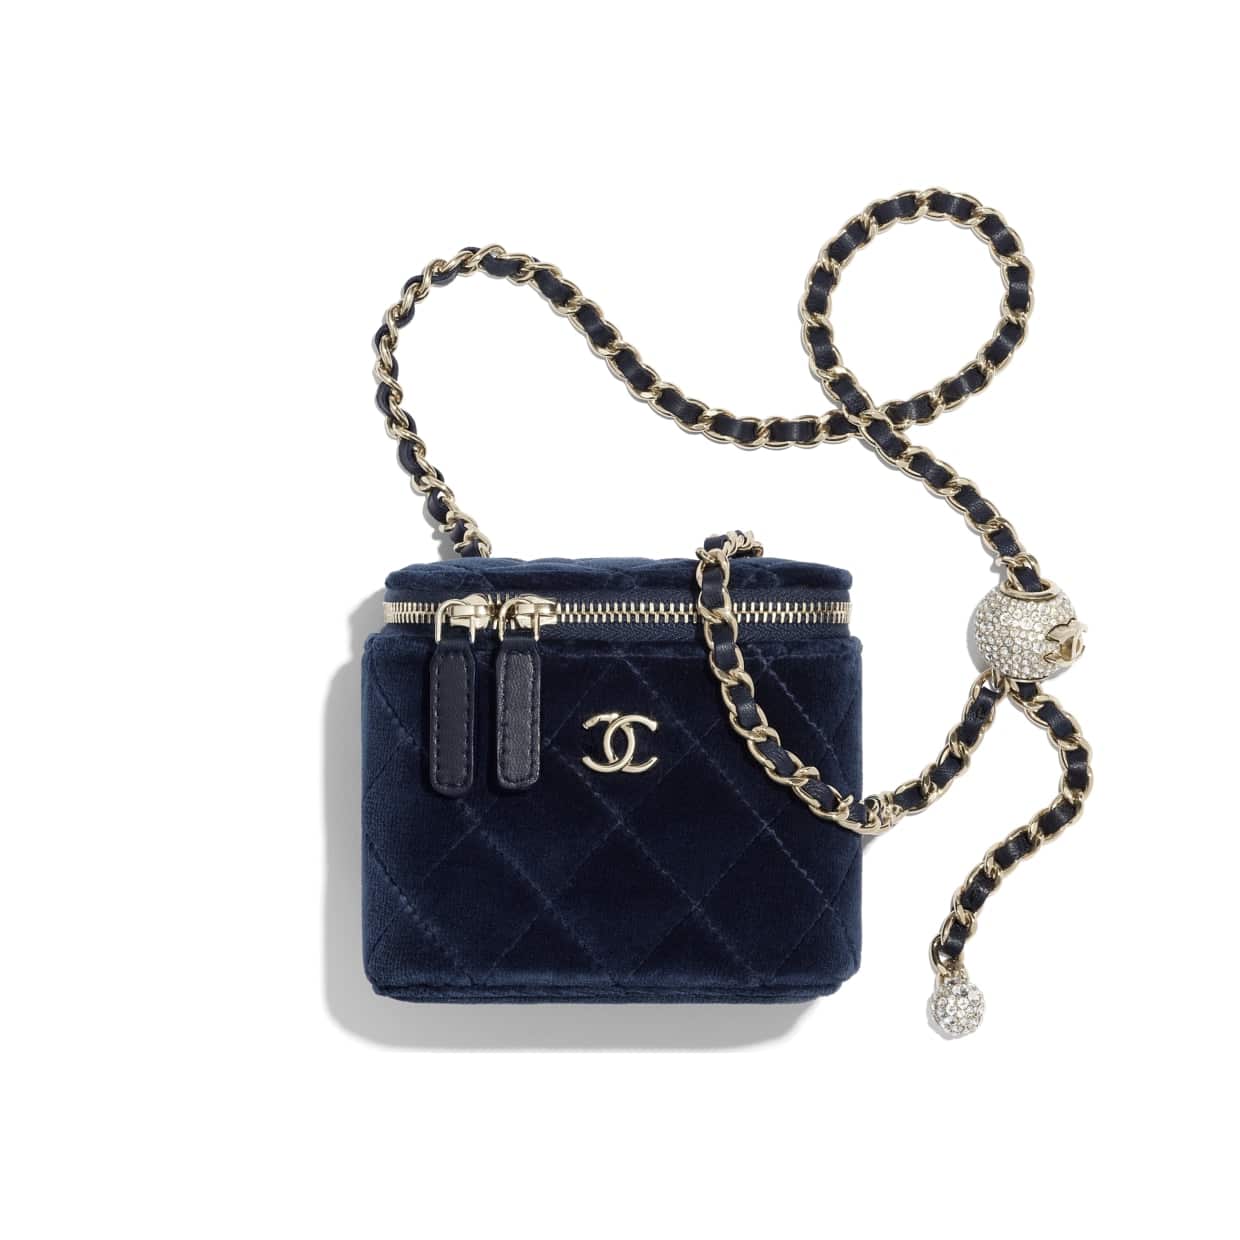 Chanel Métiers d'Art Pre-Fall 2020 Small Leather Goods Collection 